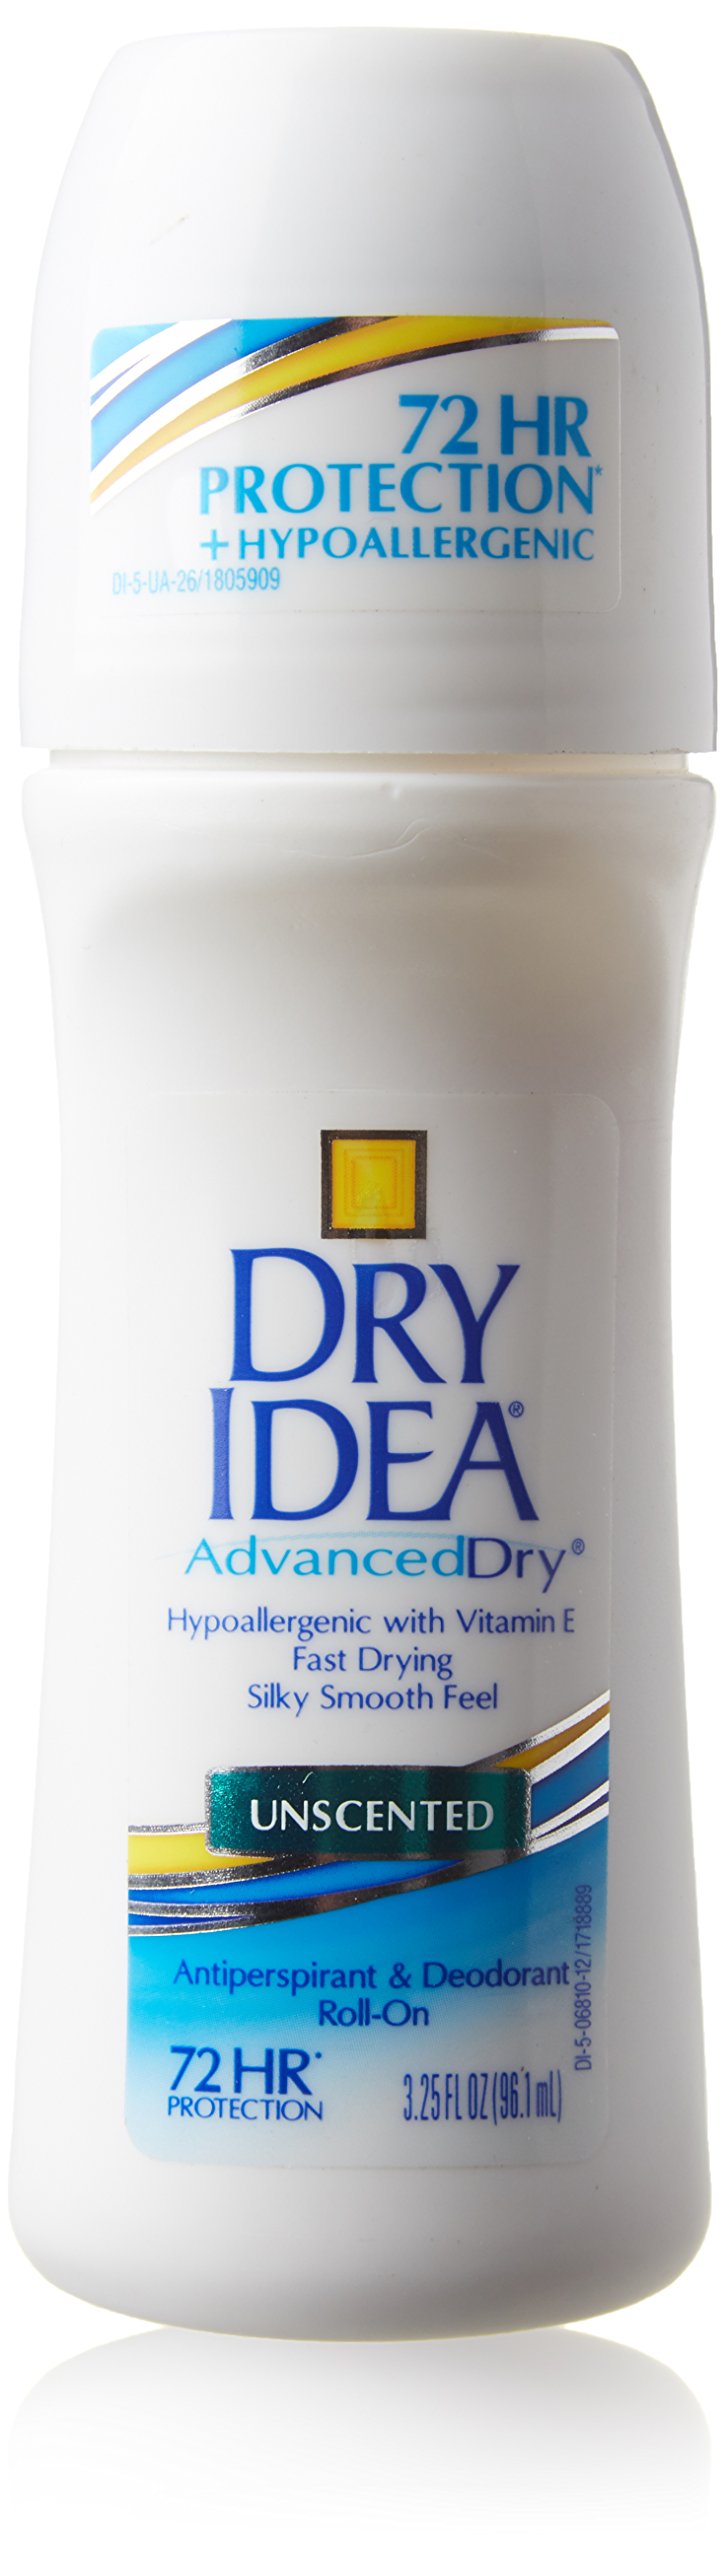 Dry Idea Antiperspirant Deodorant Roll On, Unscented, 3.25 Ounce